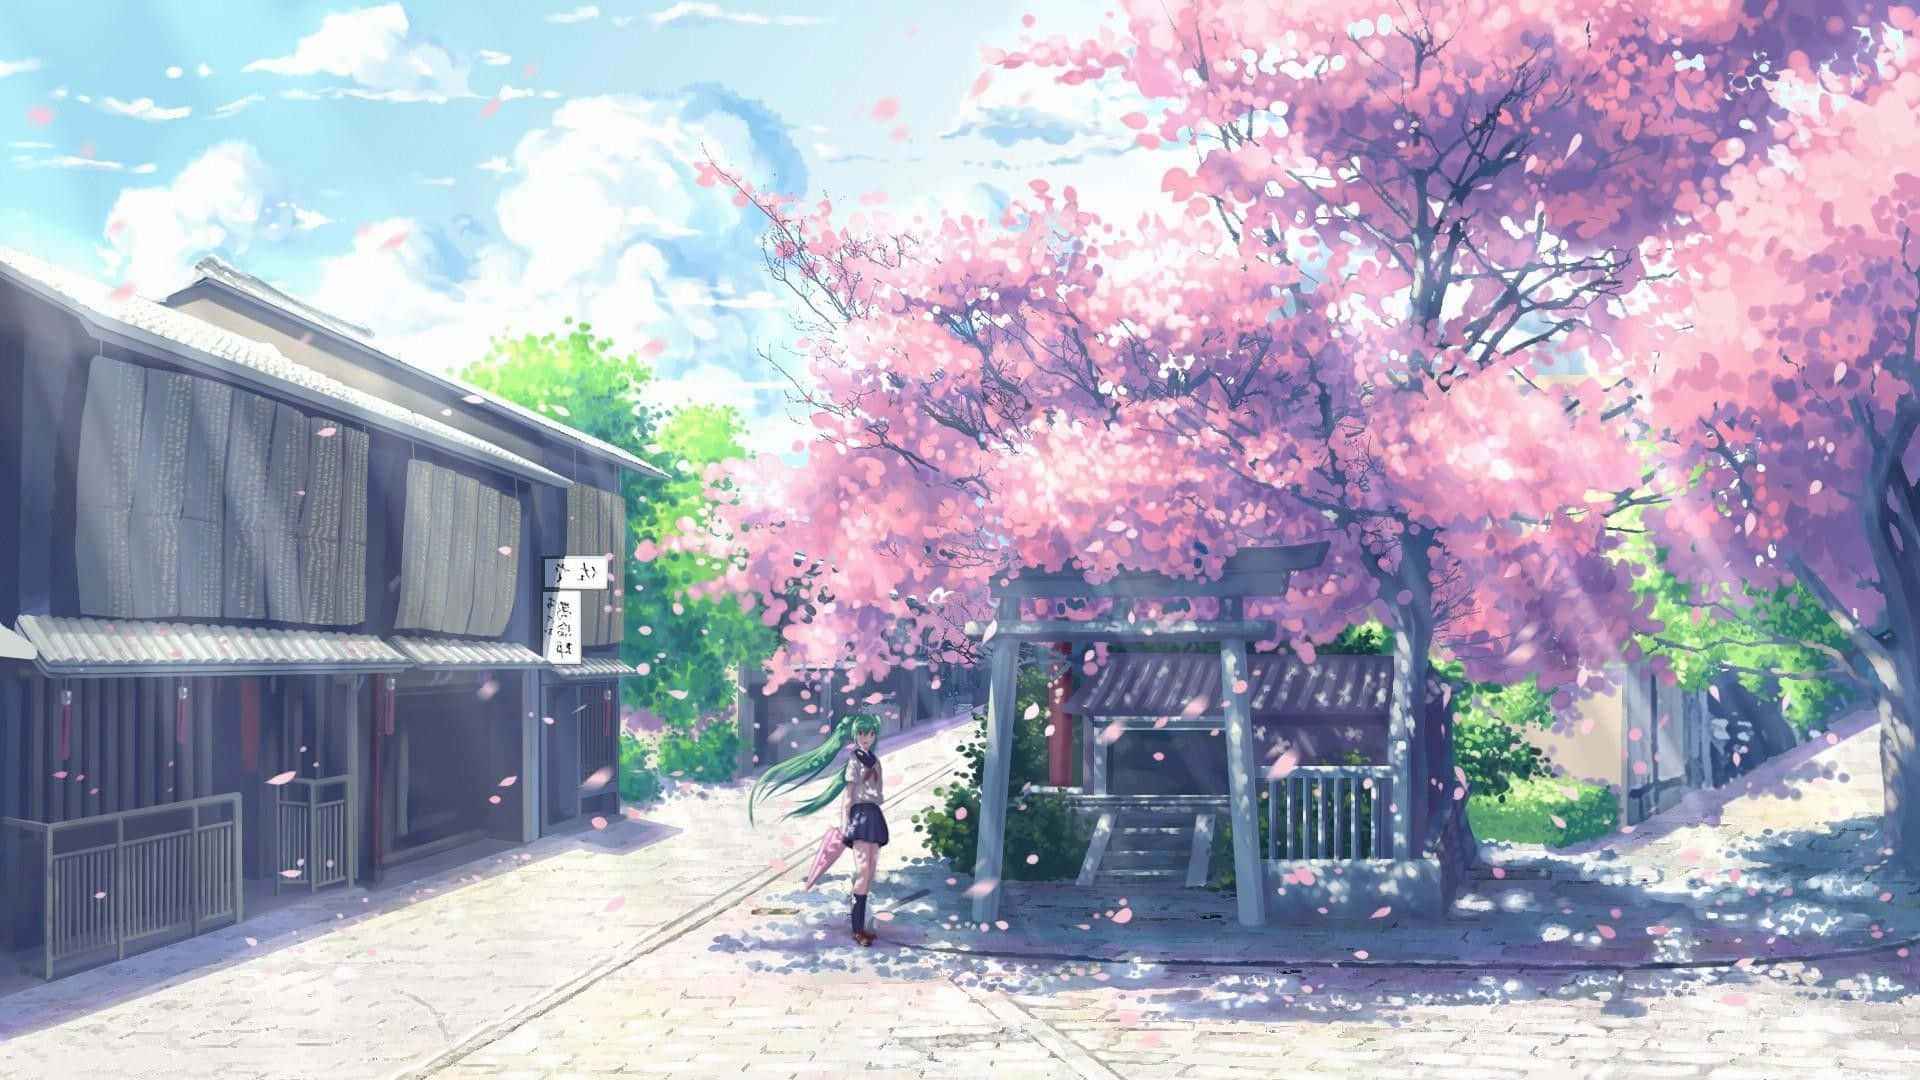 100+] Cherry Blossoms Anime Scenery Wallpapers for FREE 